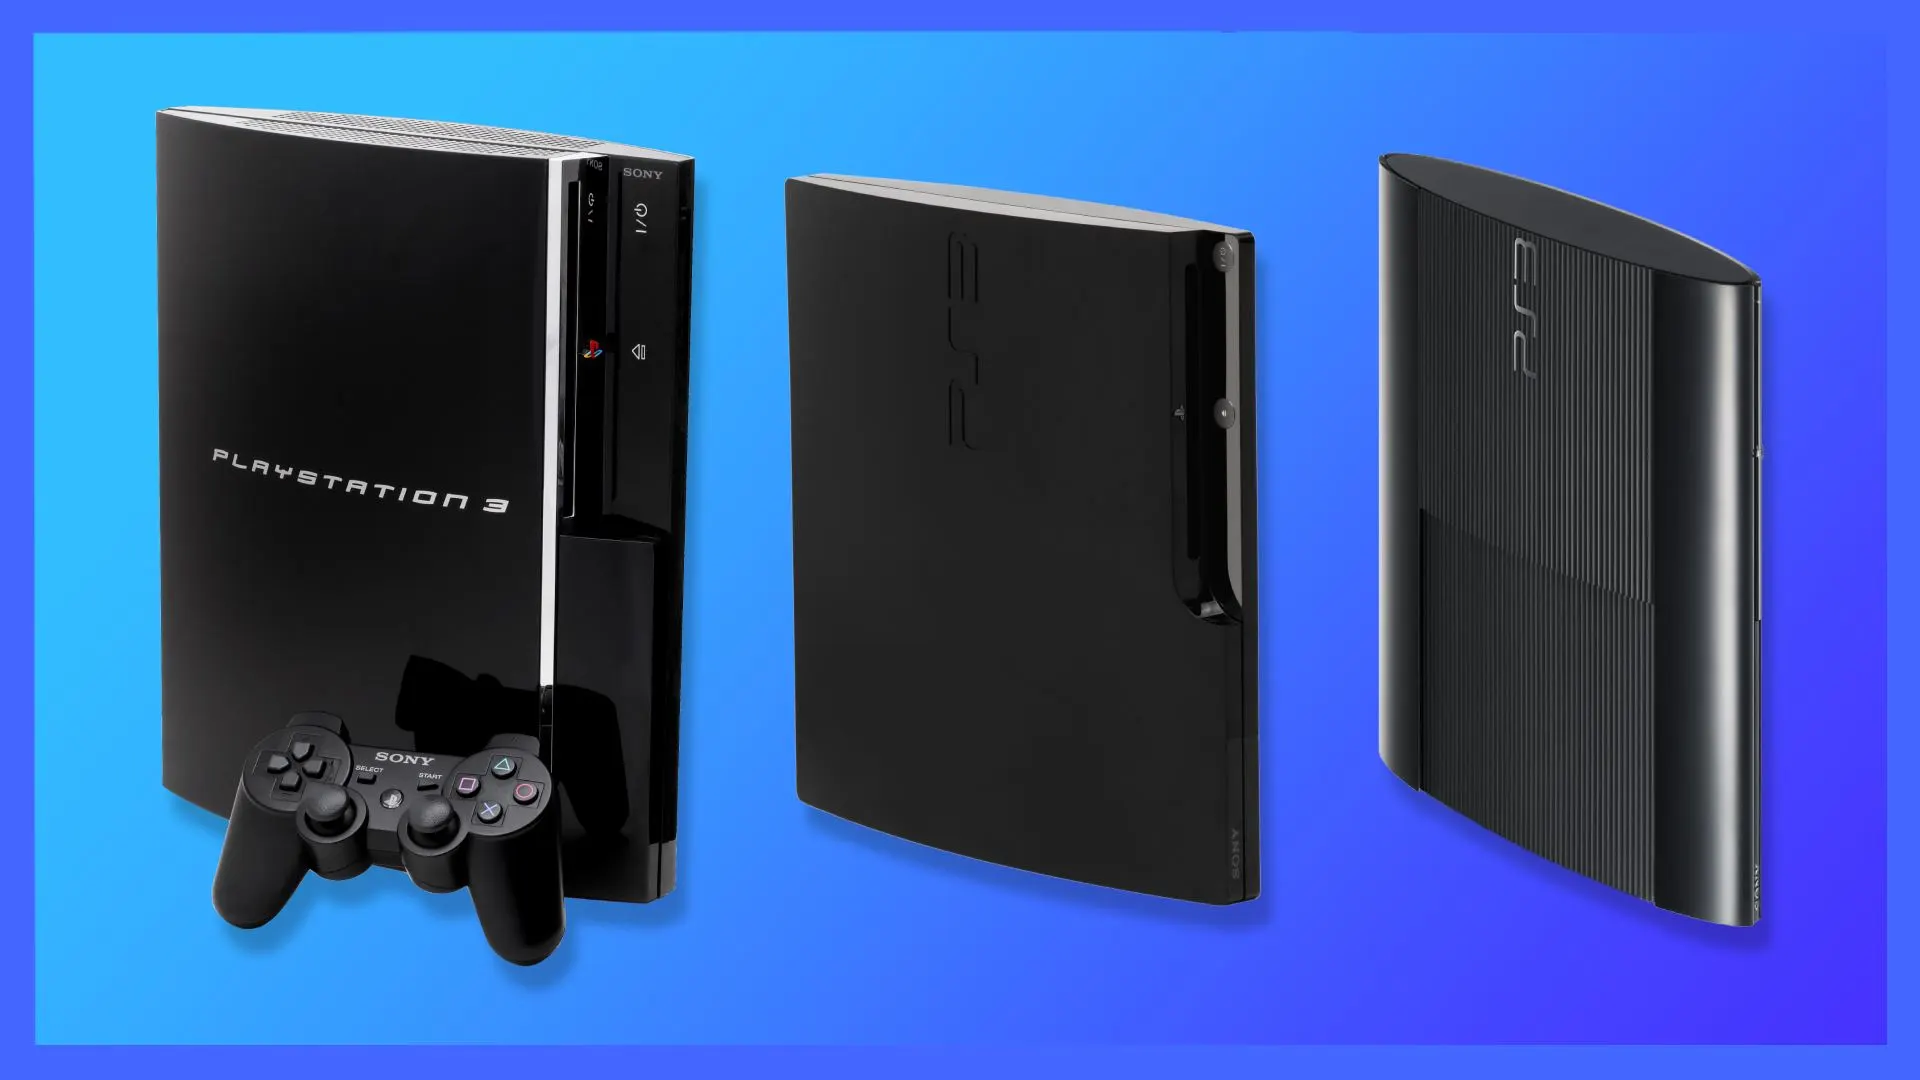 How Much Is A Playstation 3 Worth